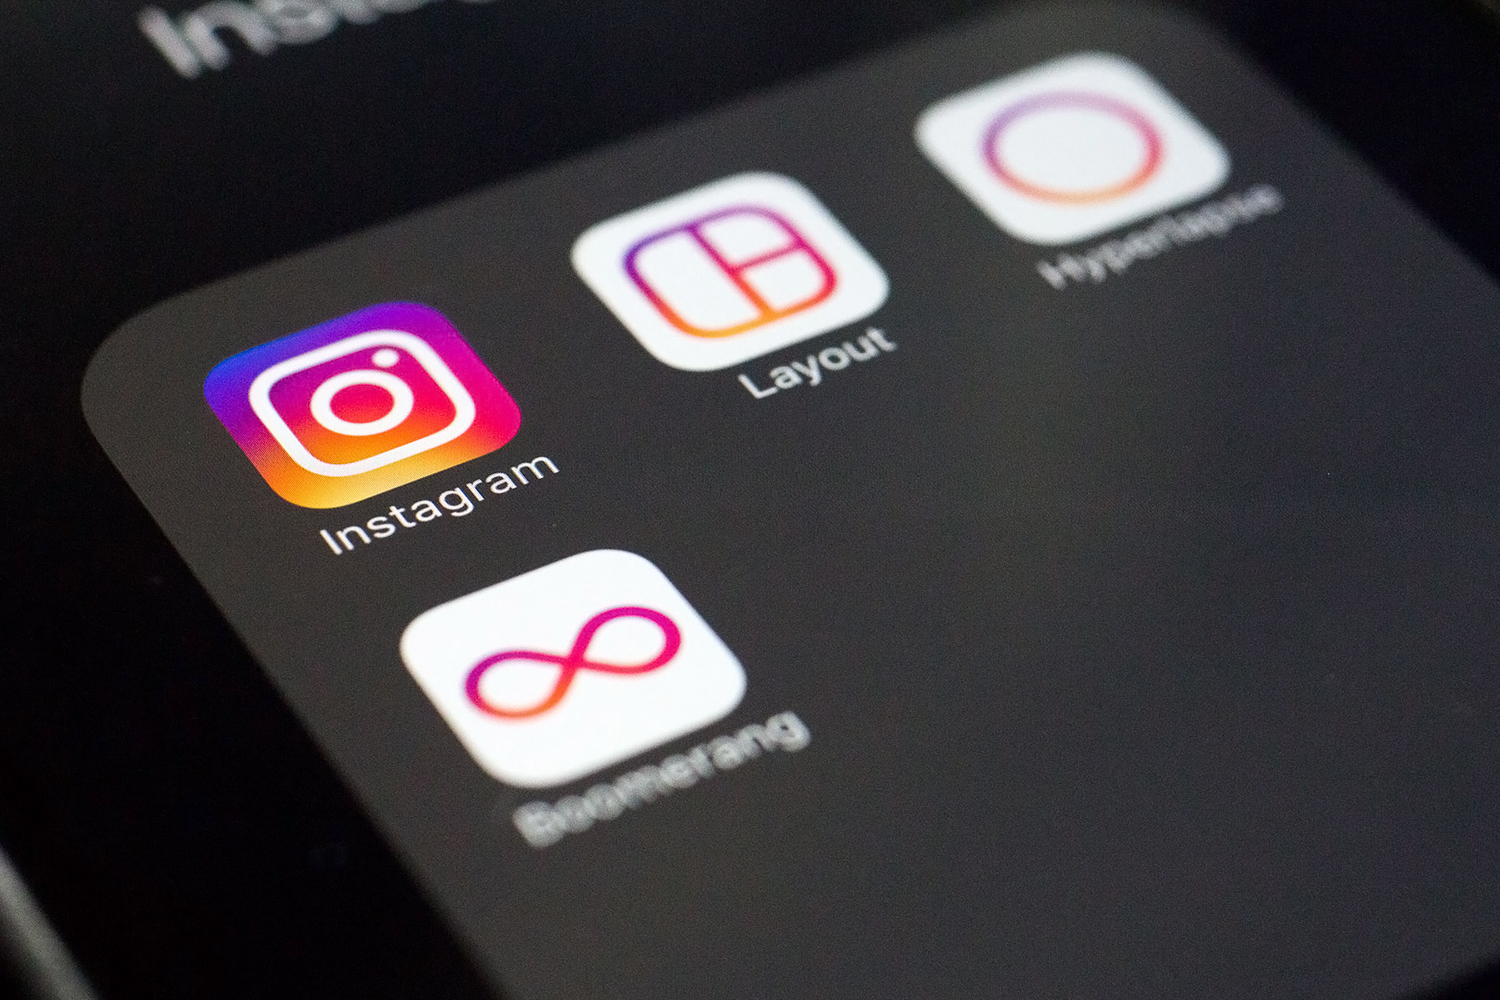 New Features Available with Instagram's Latest Update